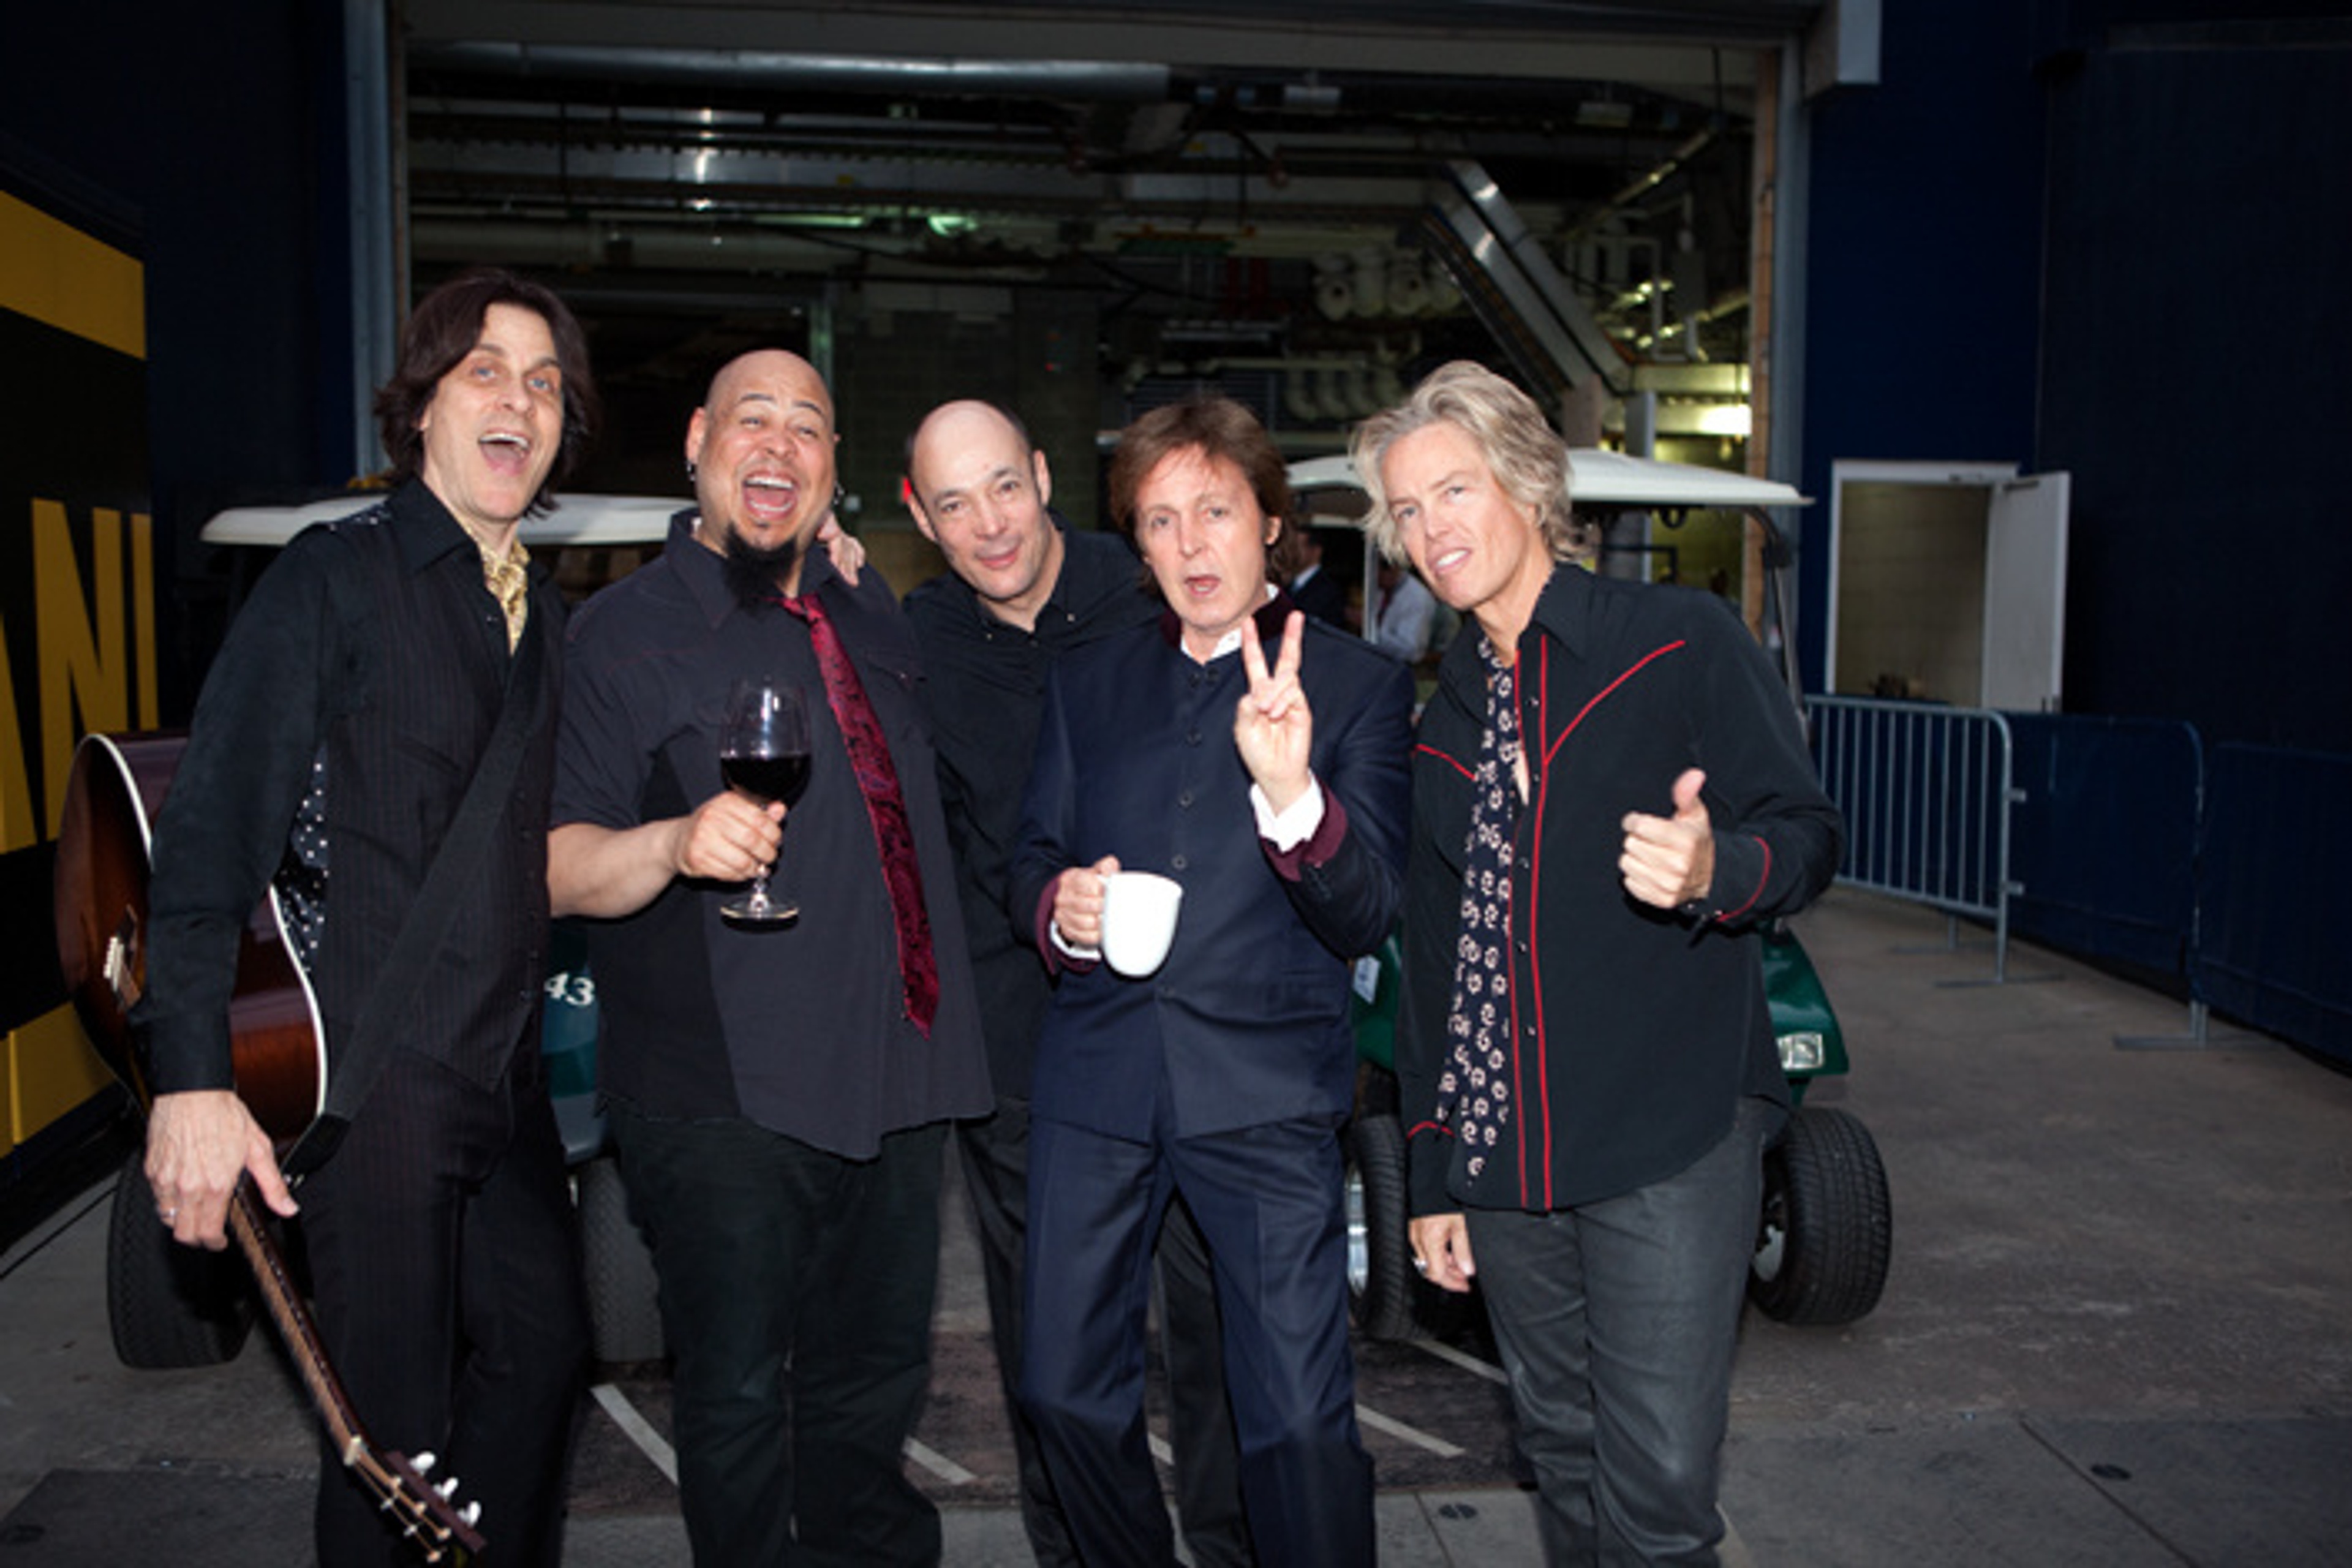 Paul and the band backstage on his 'On The Run' tour at Yankee Stadium, NYC, 16-Jul-11